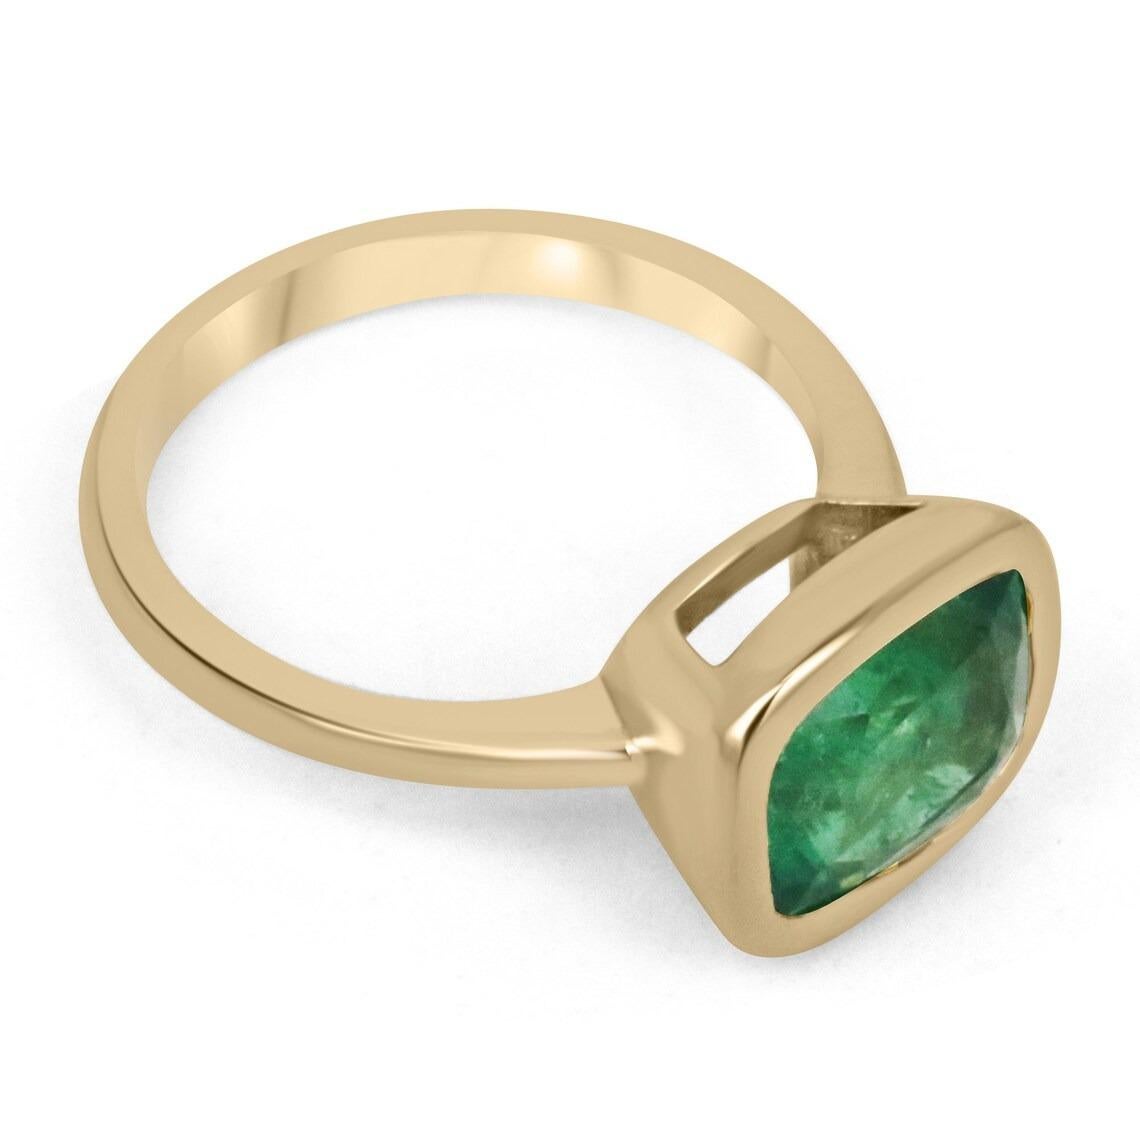 Displayed is a medium-dark green Zambian emerald, solitaire, cushion cut bezel ring in 18K yellow gold. This gorgeous solitaire ring carries a full 3.48-carat emerald in a sleek bezel setting. The emerald has incredible clarity and luster. This